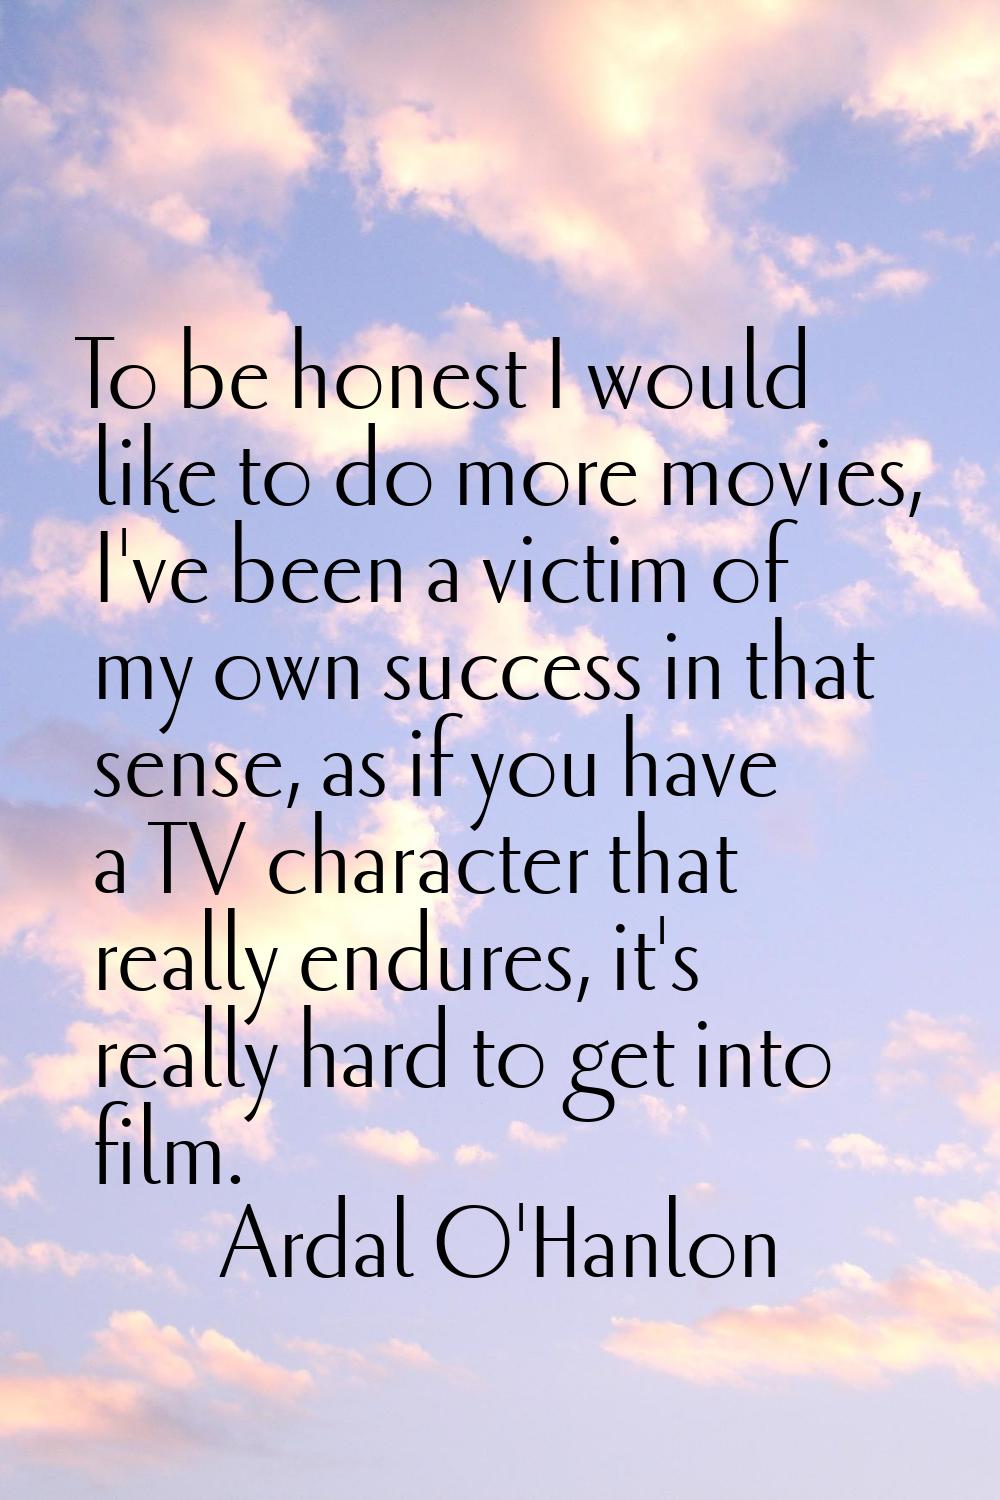 To be honest I would like to do more movies, I've been a victim of my own success in that sense, as